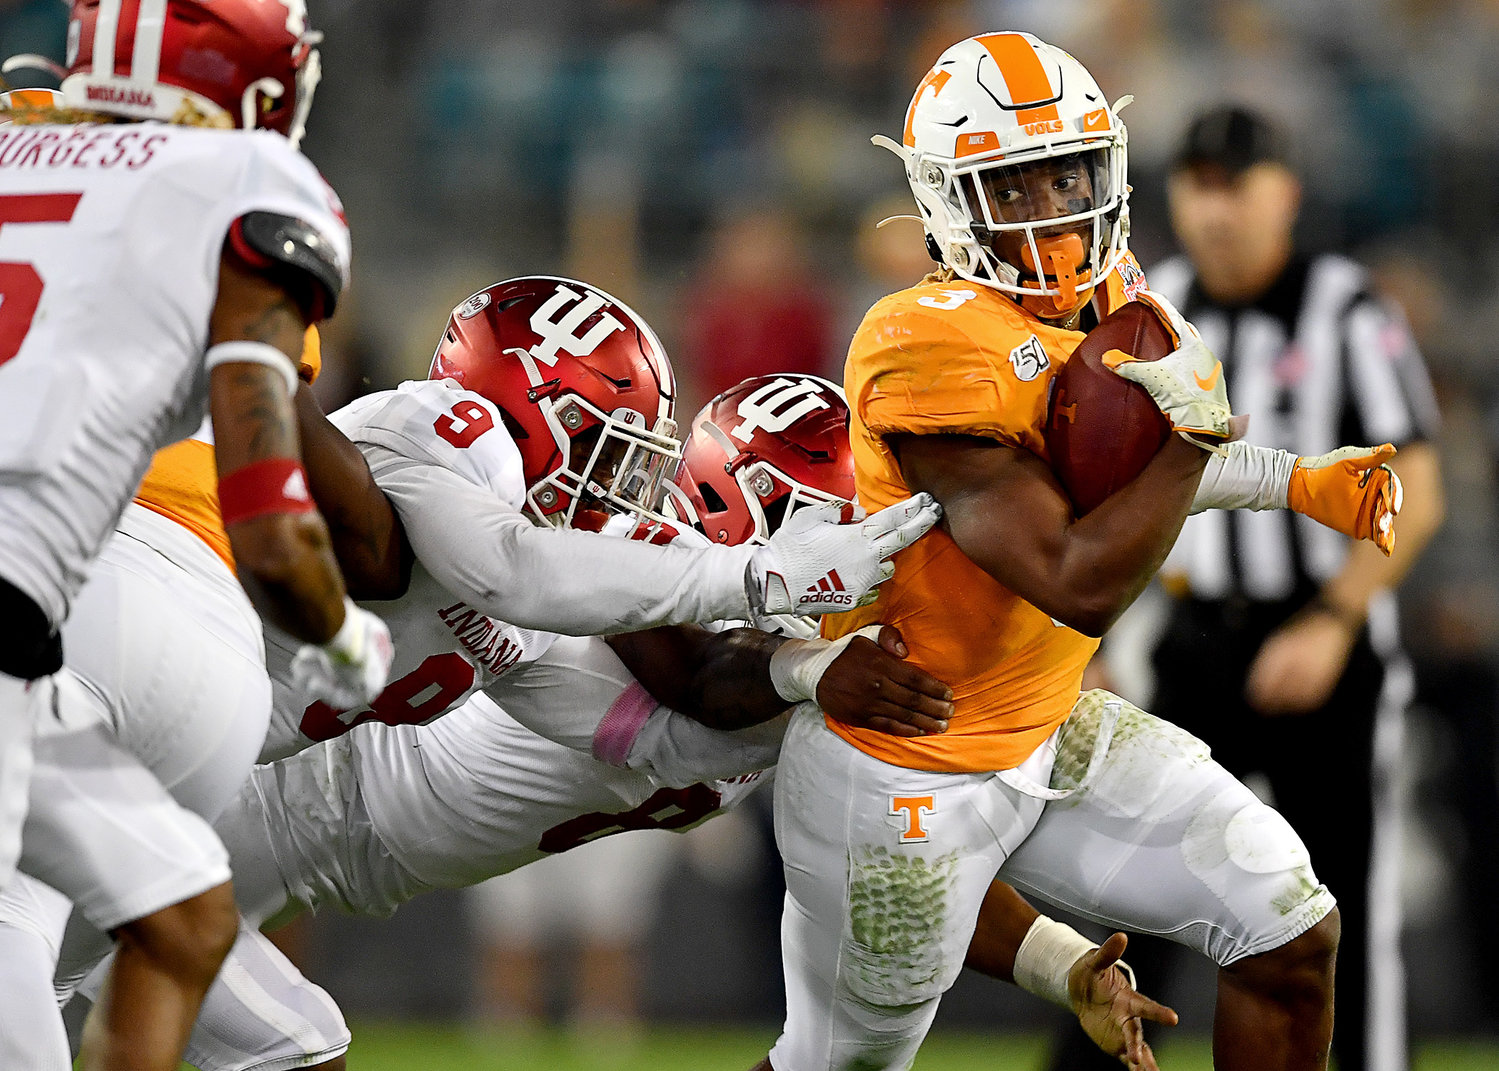 Tennessee Volunteers running back Eric Gray (3) eyes the defense on a run in the second half of the Gator Bowl NCAA football game against the Indiana Hoosiers Thursday, January 2, 2020, at TIAA Bank Field in Jacksonville, Fla.